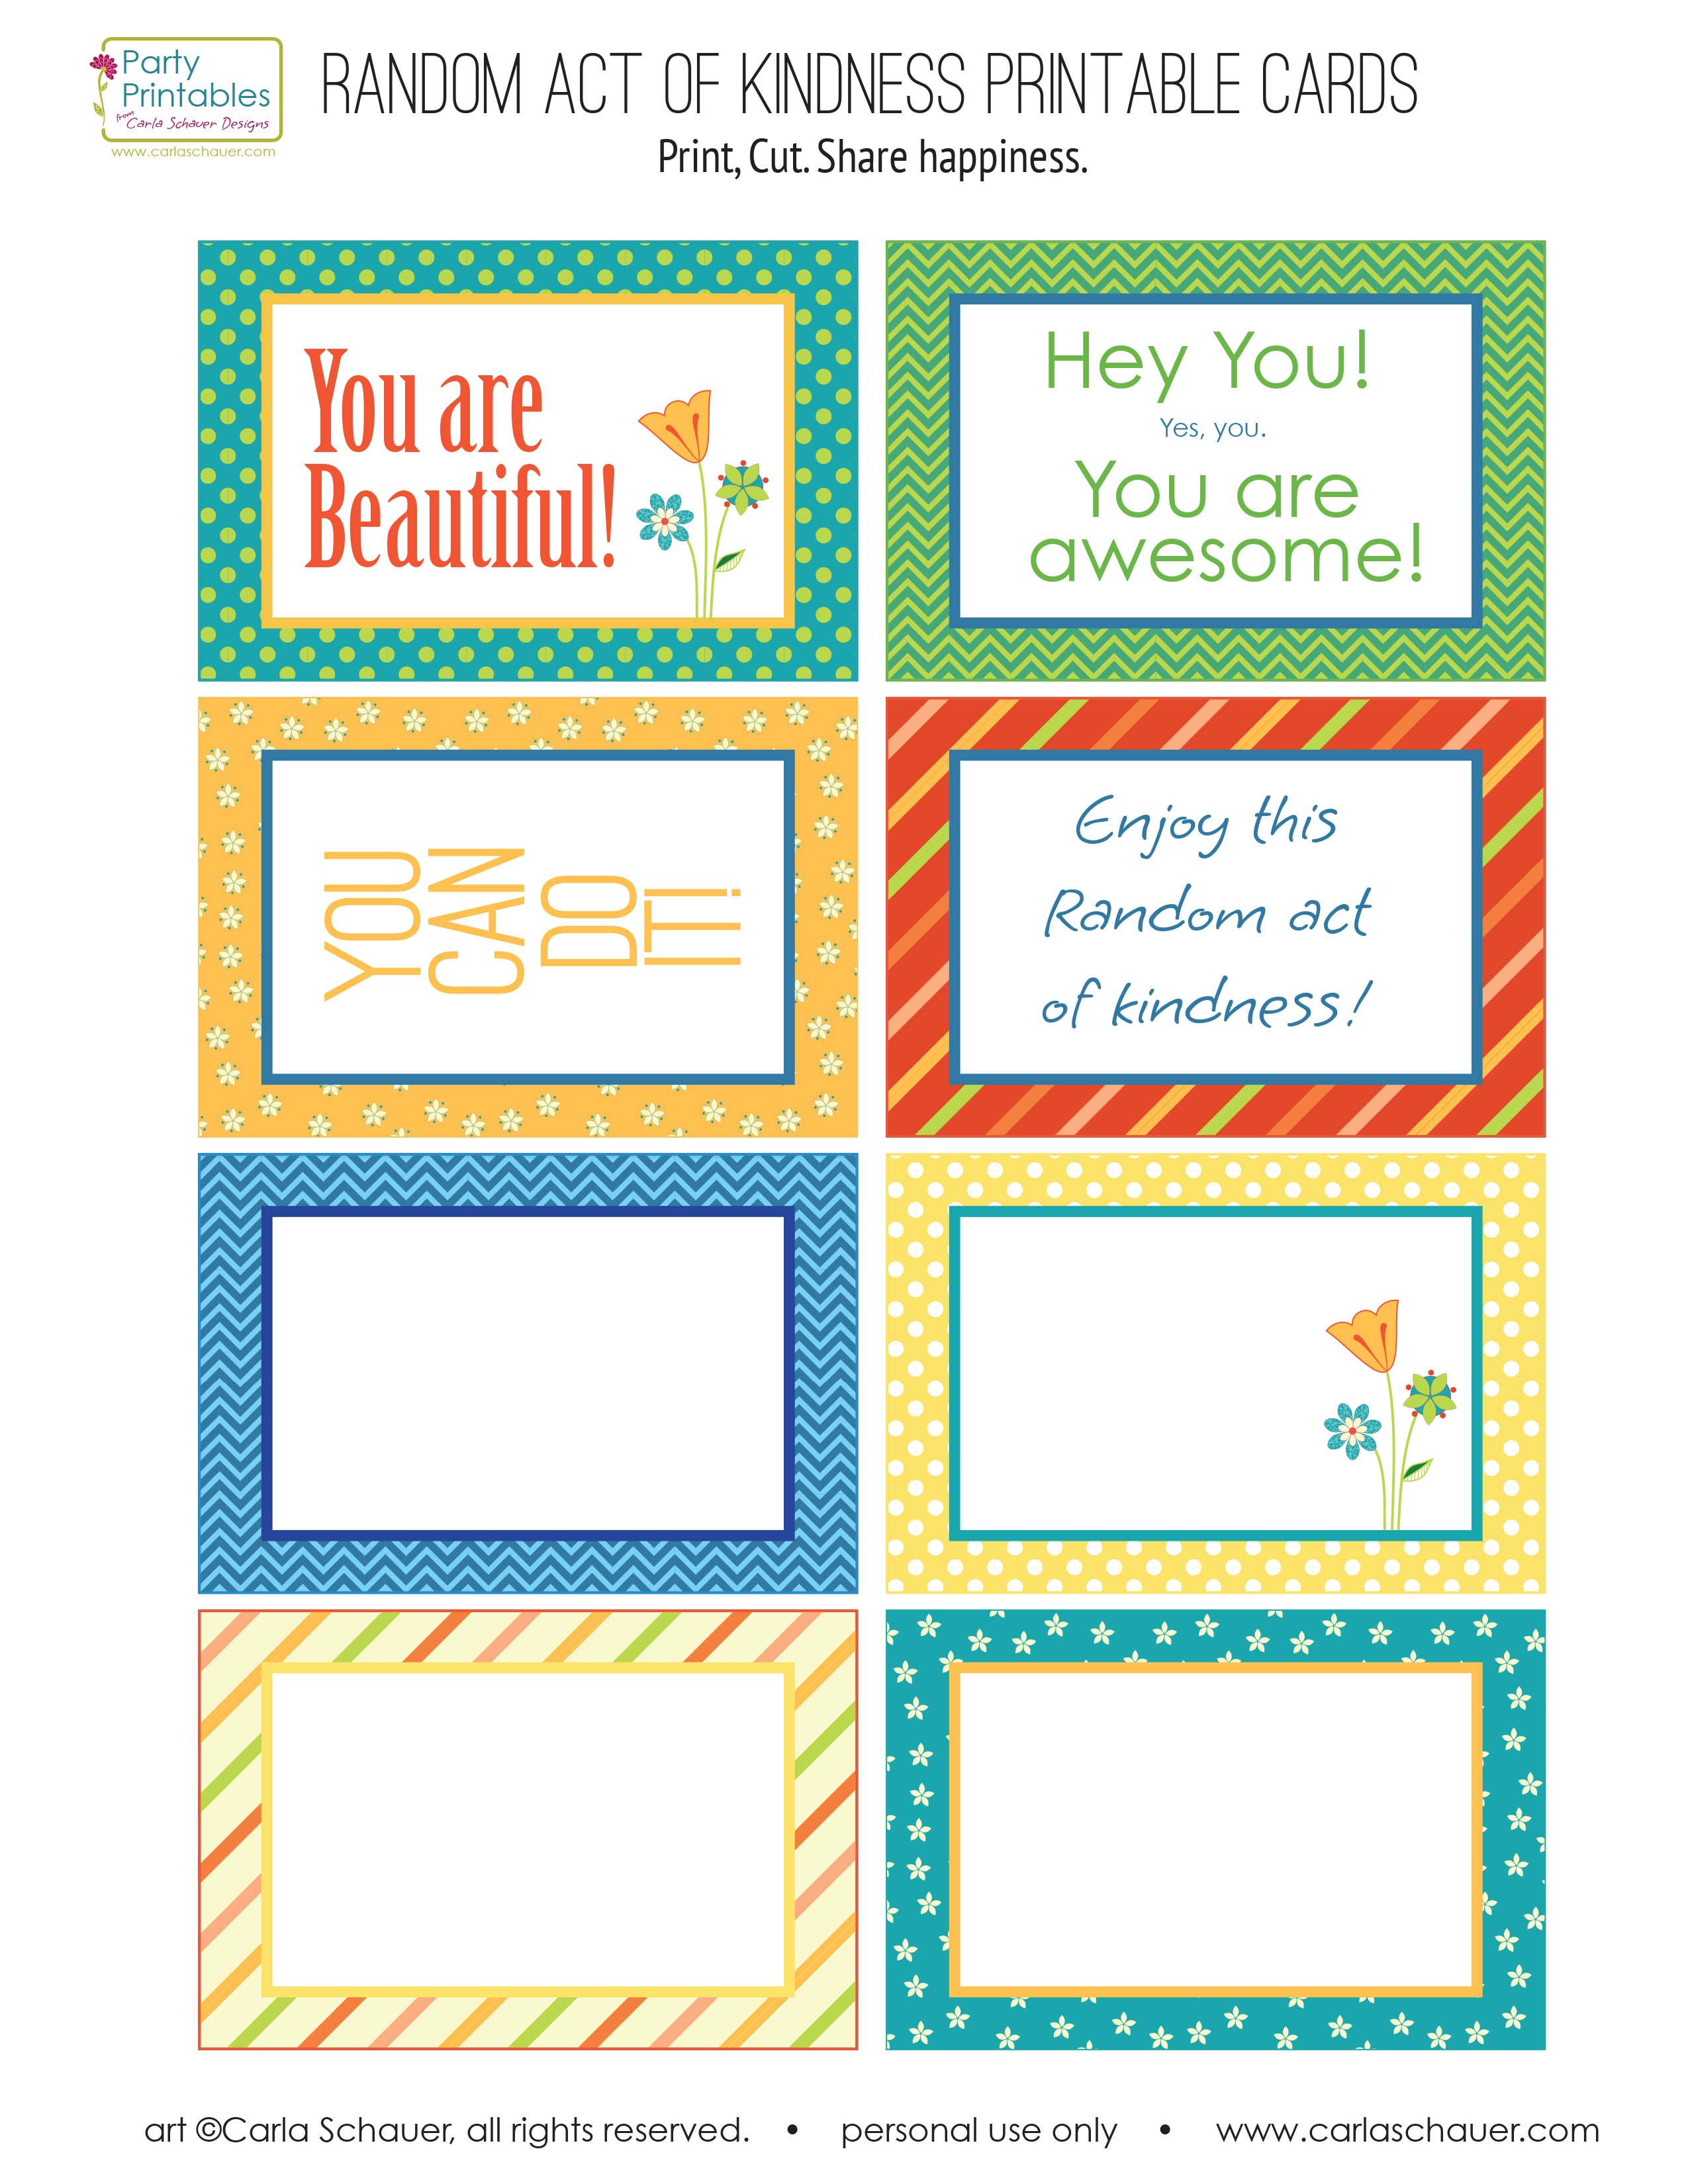 Random Act Of Kindness Free Printables | Carla Schauer Designs Pertaining To Random Acts Of Kindness Cards Templates